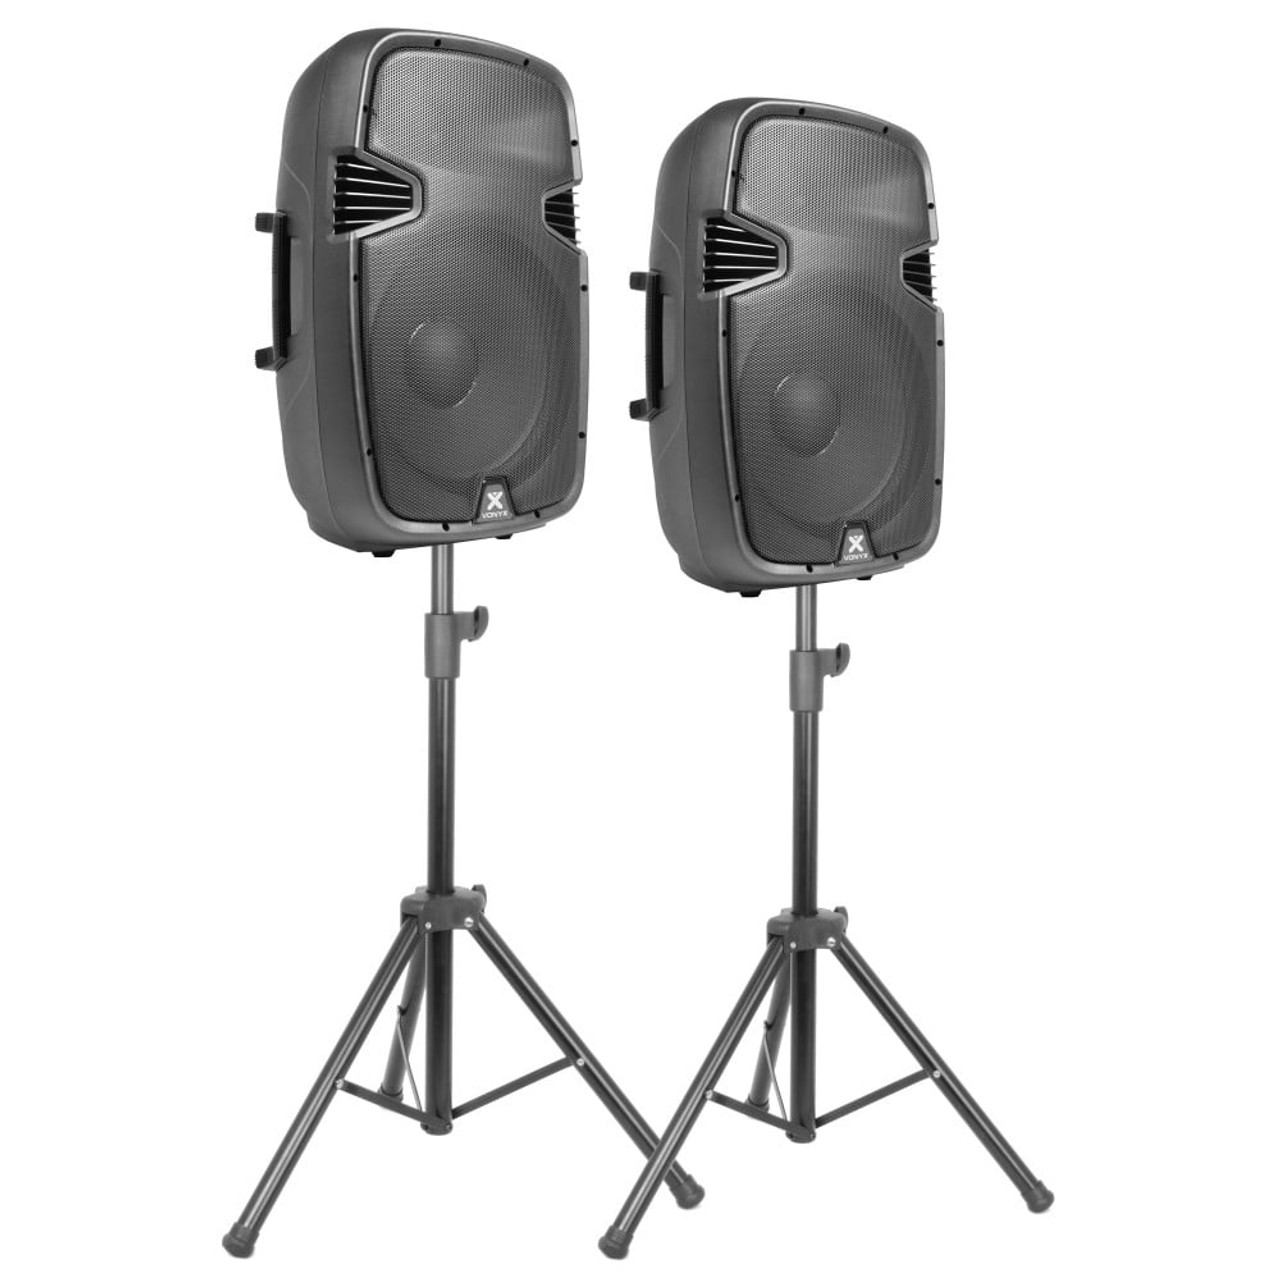 Vonyx PSS302 10" Portable PA System with Bluetooth 300W